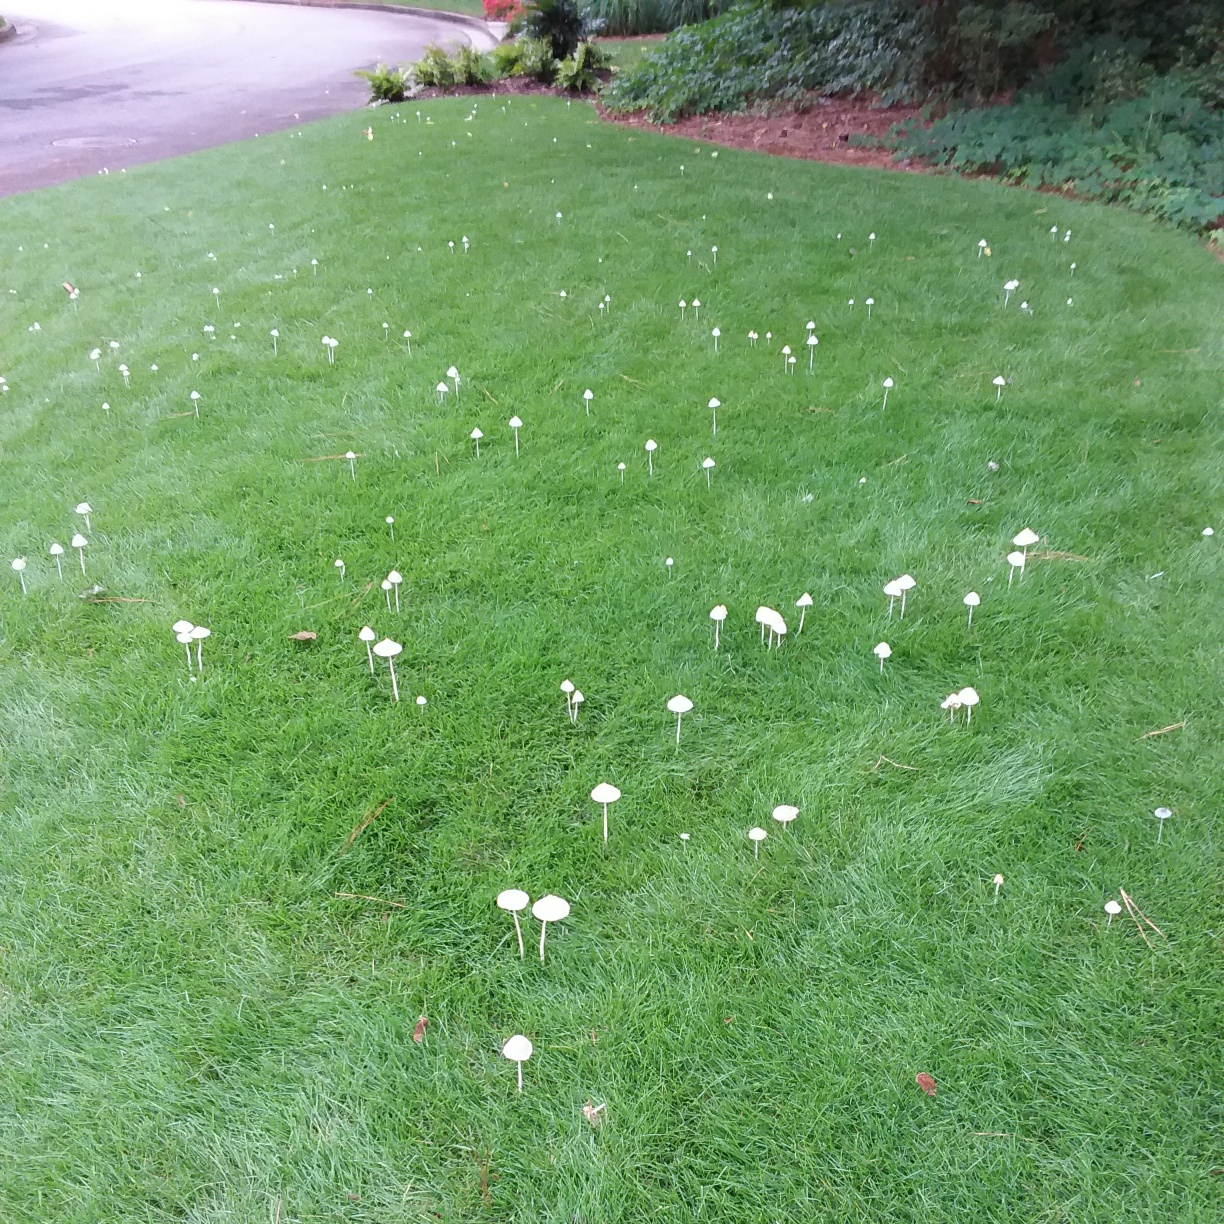 Mushrooms in the Lawn - Good or Bad?